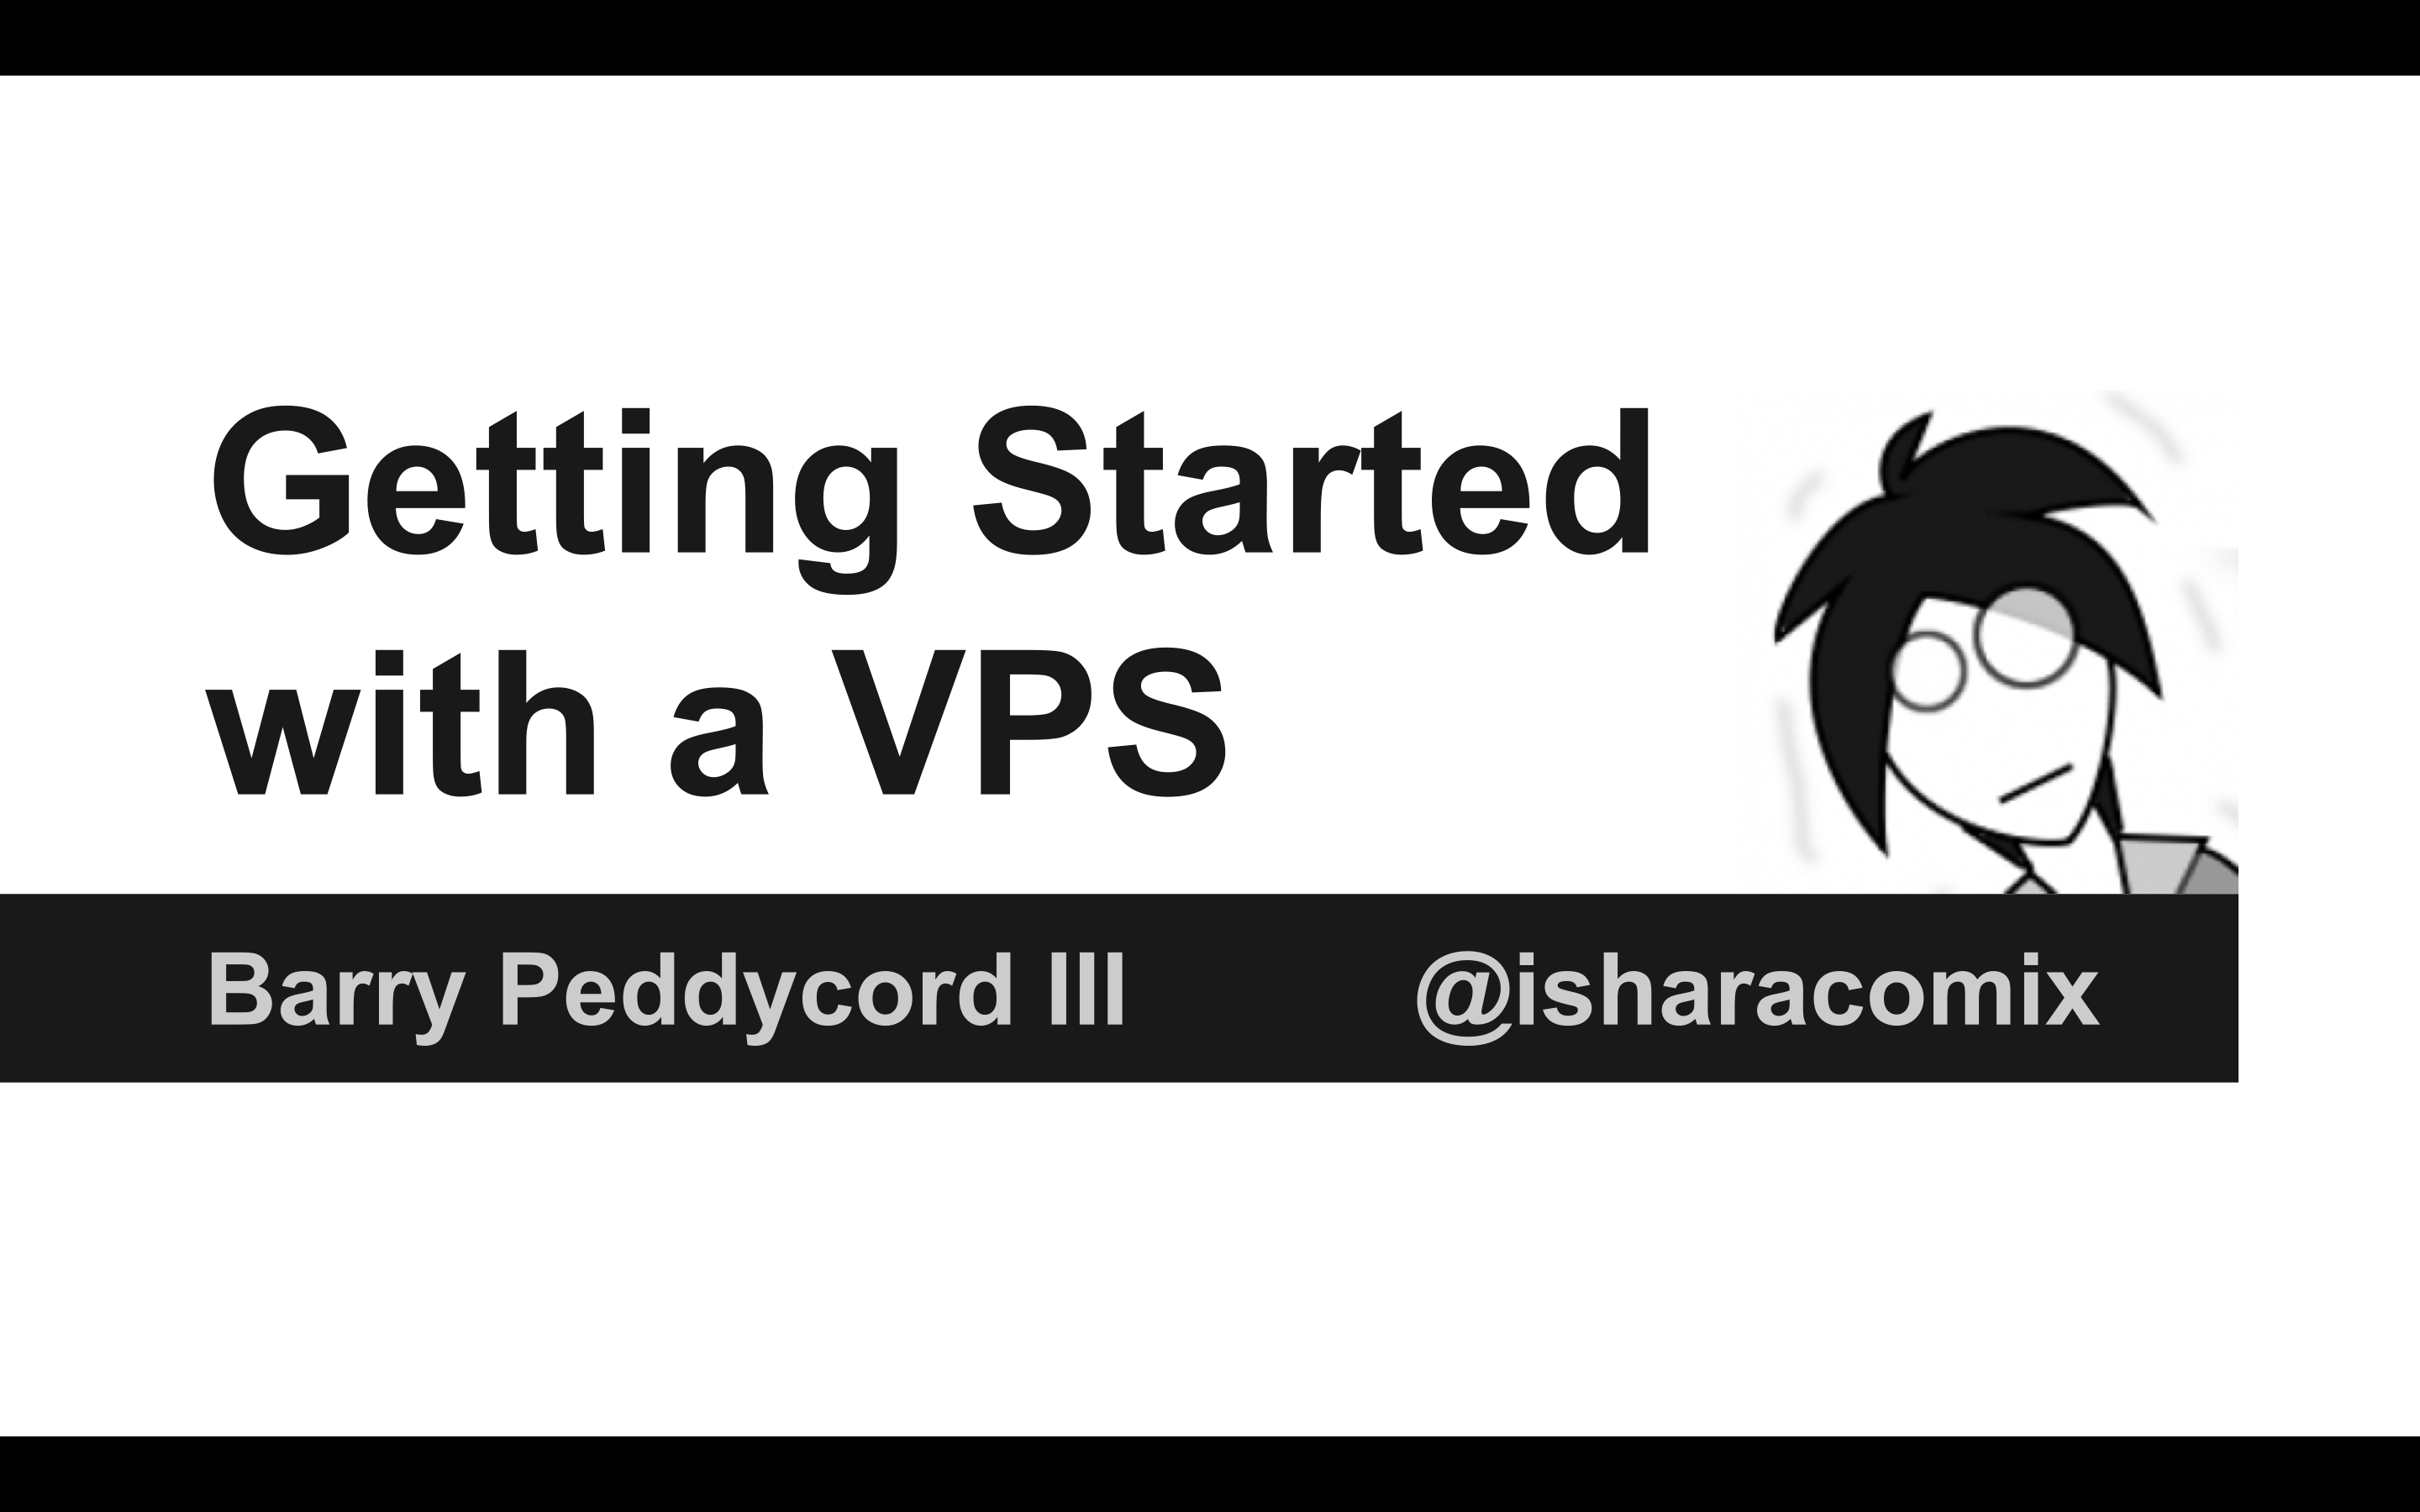 Getting started with a VPS